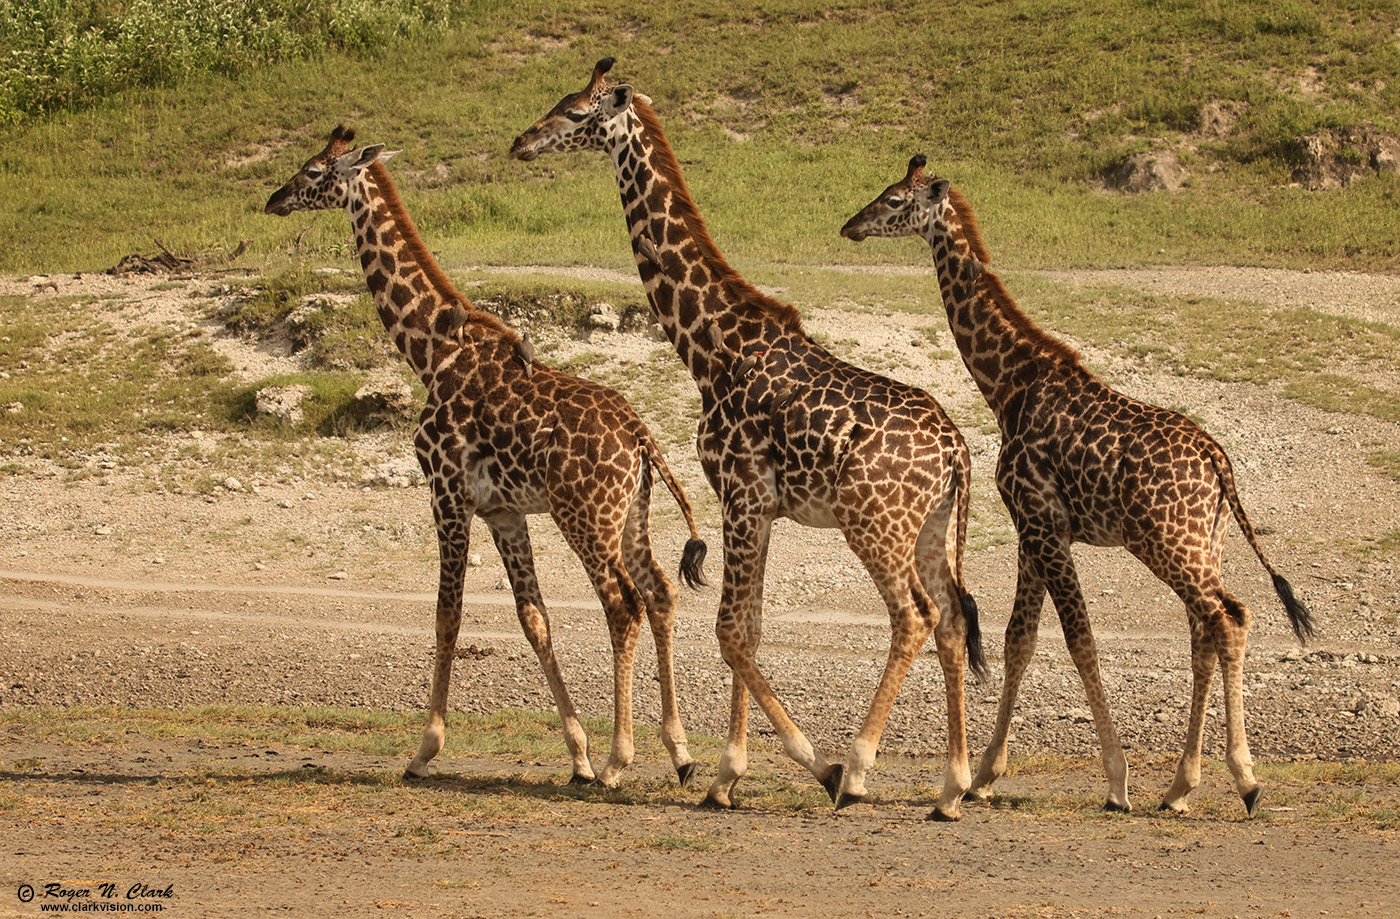 image young-giraffes-0U3A0391-c-1400s.jpg is Copyrighted by Roger N. Clark, www.clarkvision.com